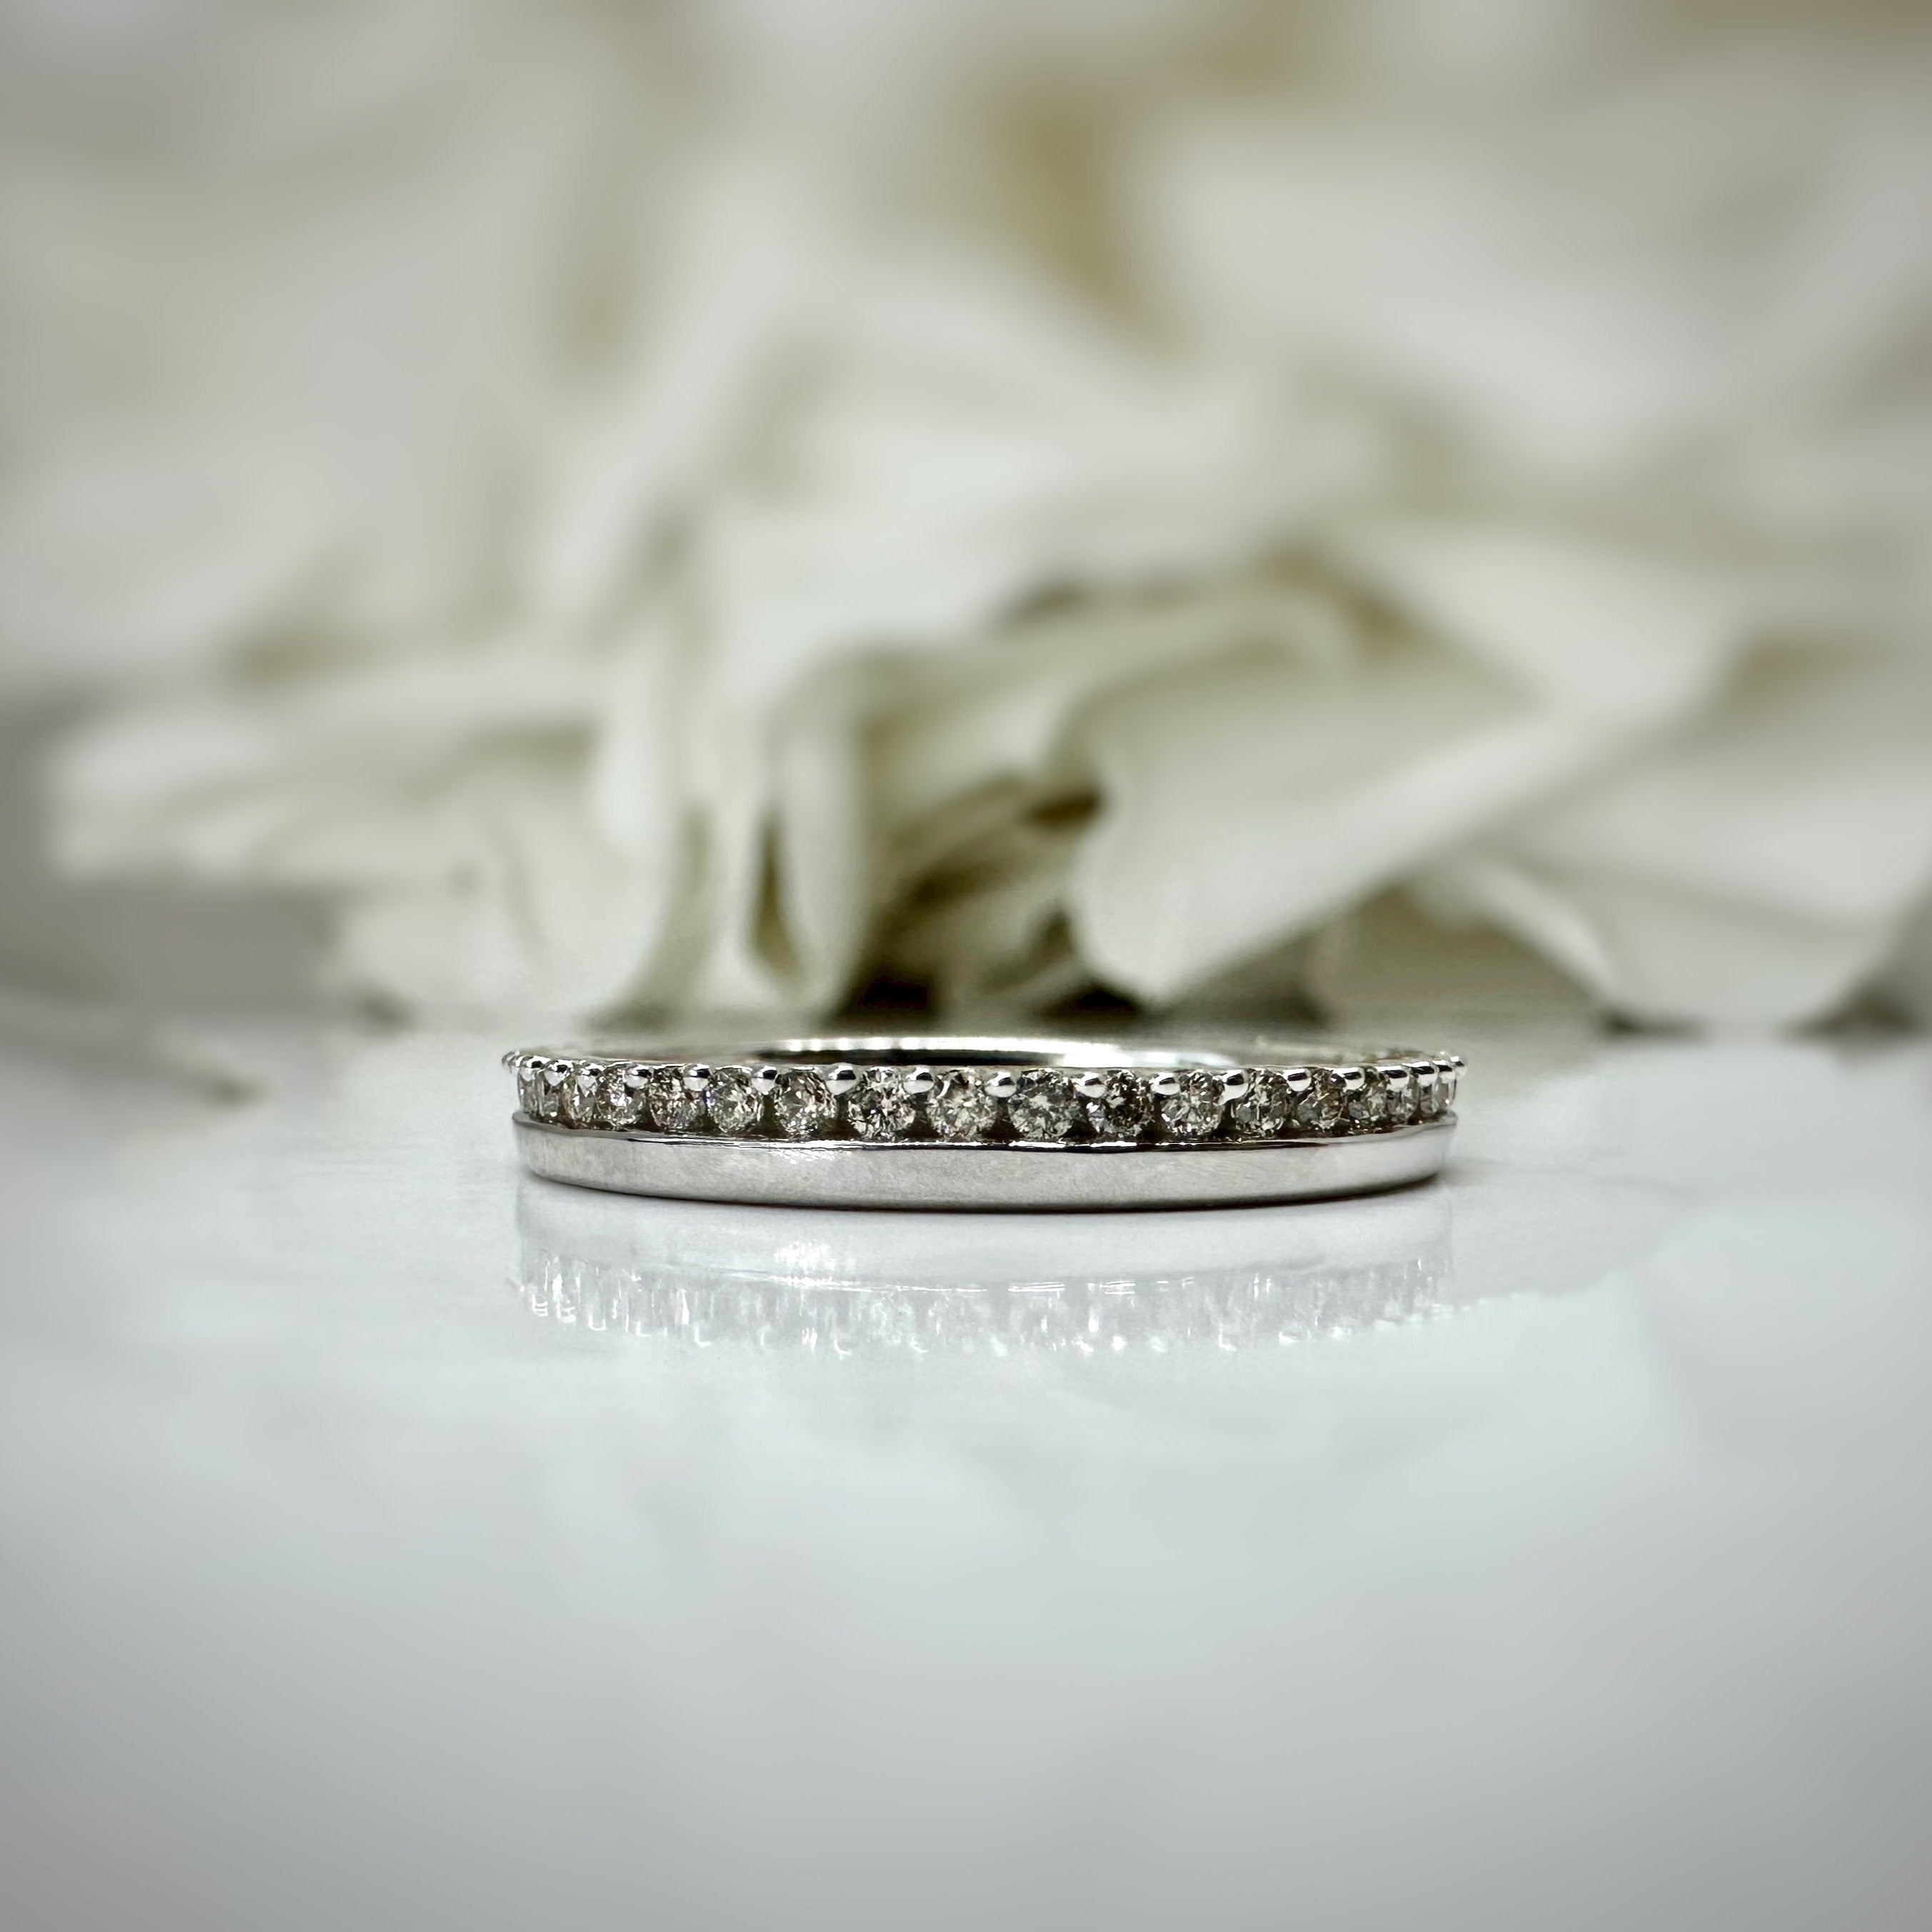 10k white gold double row anniversary band